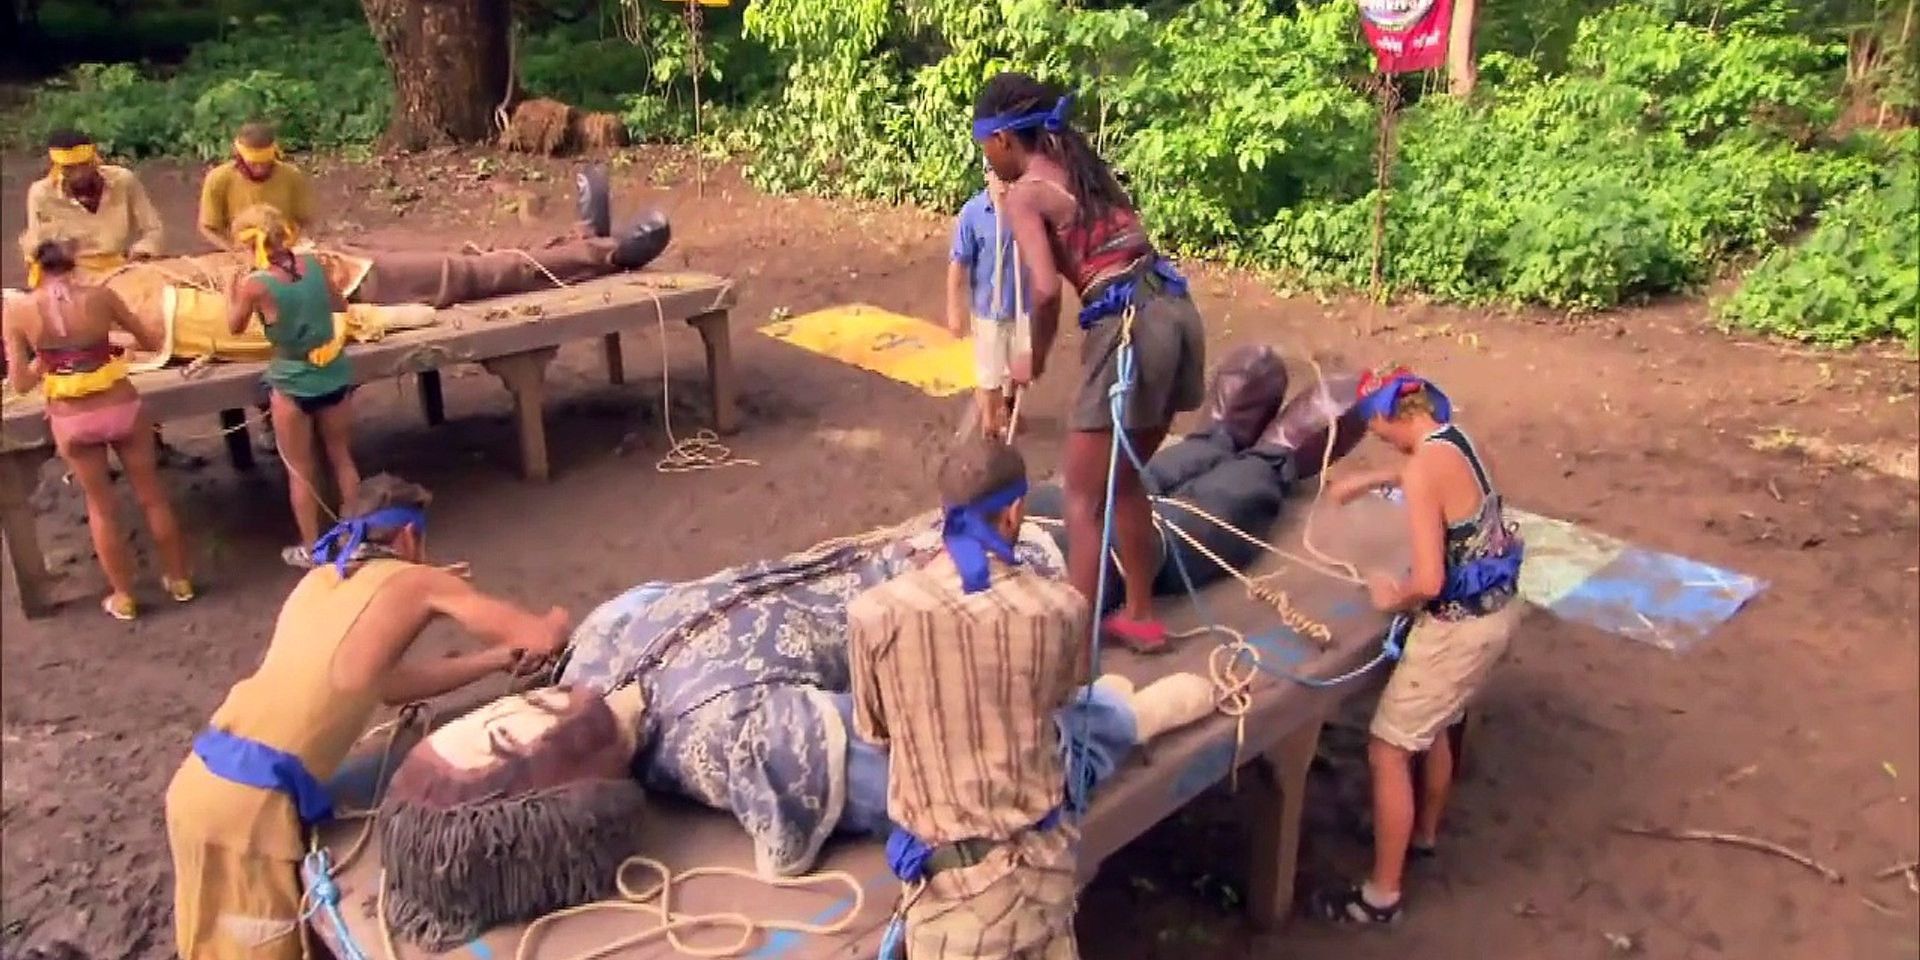 The cast of Survivor: Nicaragua building a large dummy in the Gulliver's Travels challenge